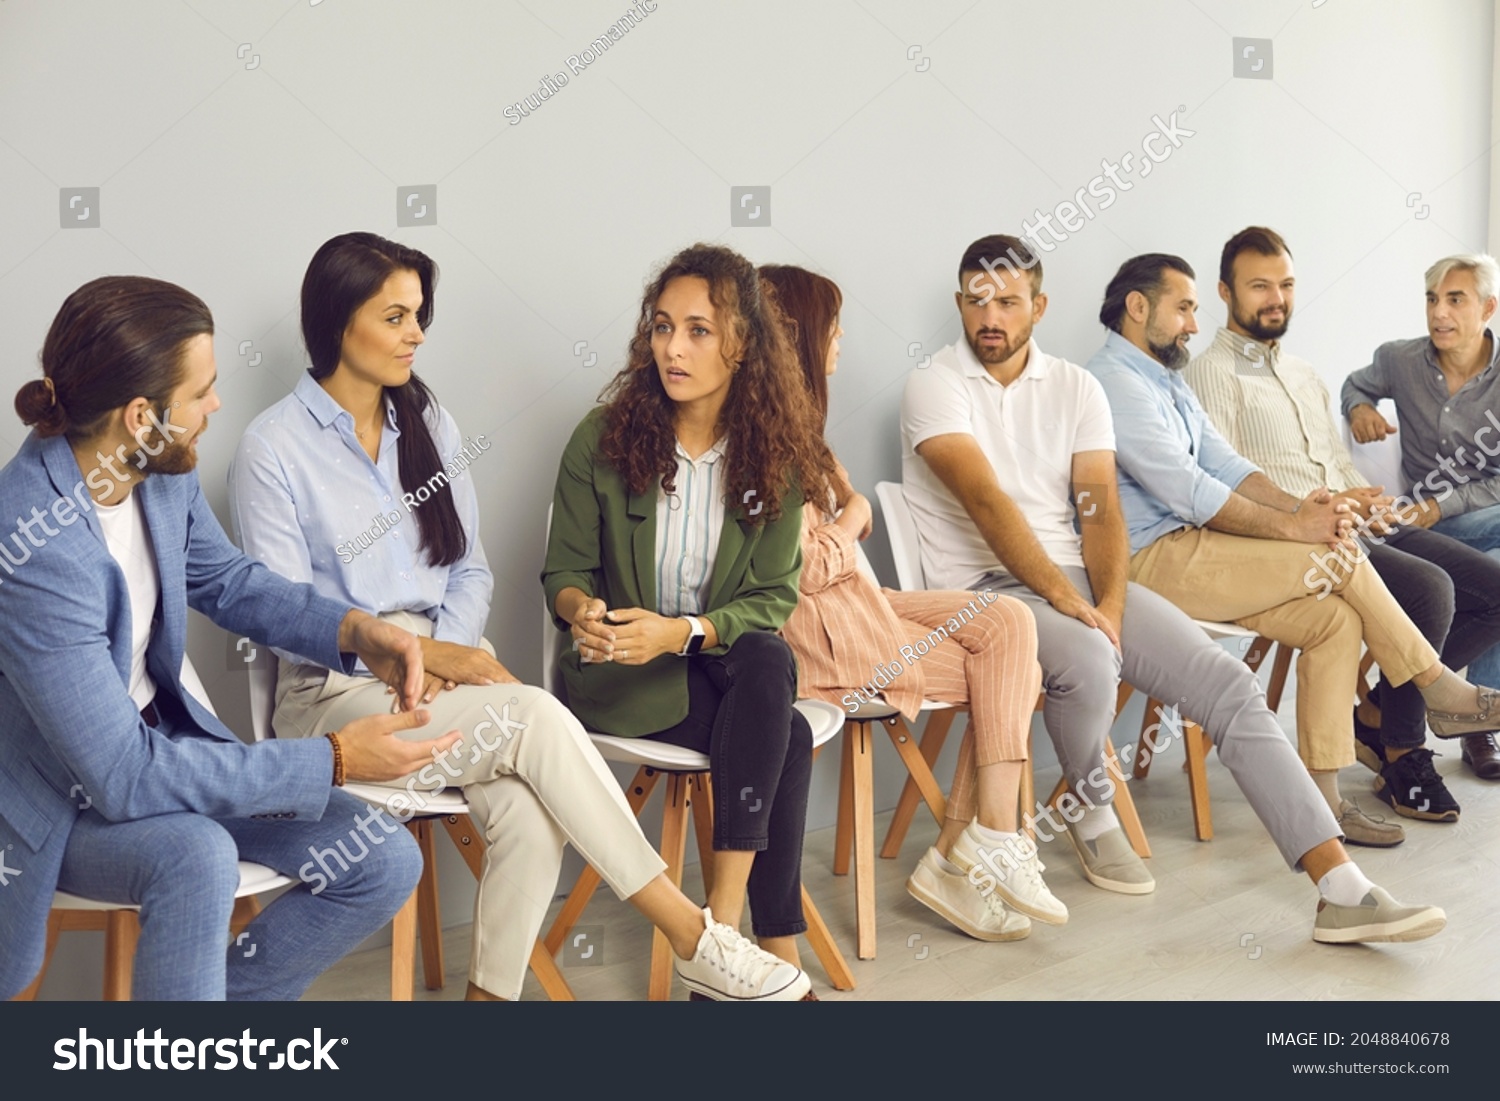 Groups of serious people of different ages talking and having discussions while sitting in queue by office wall waiting for job interview, public lecture, training session, audition or business event #2048840678